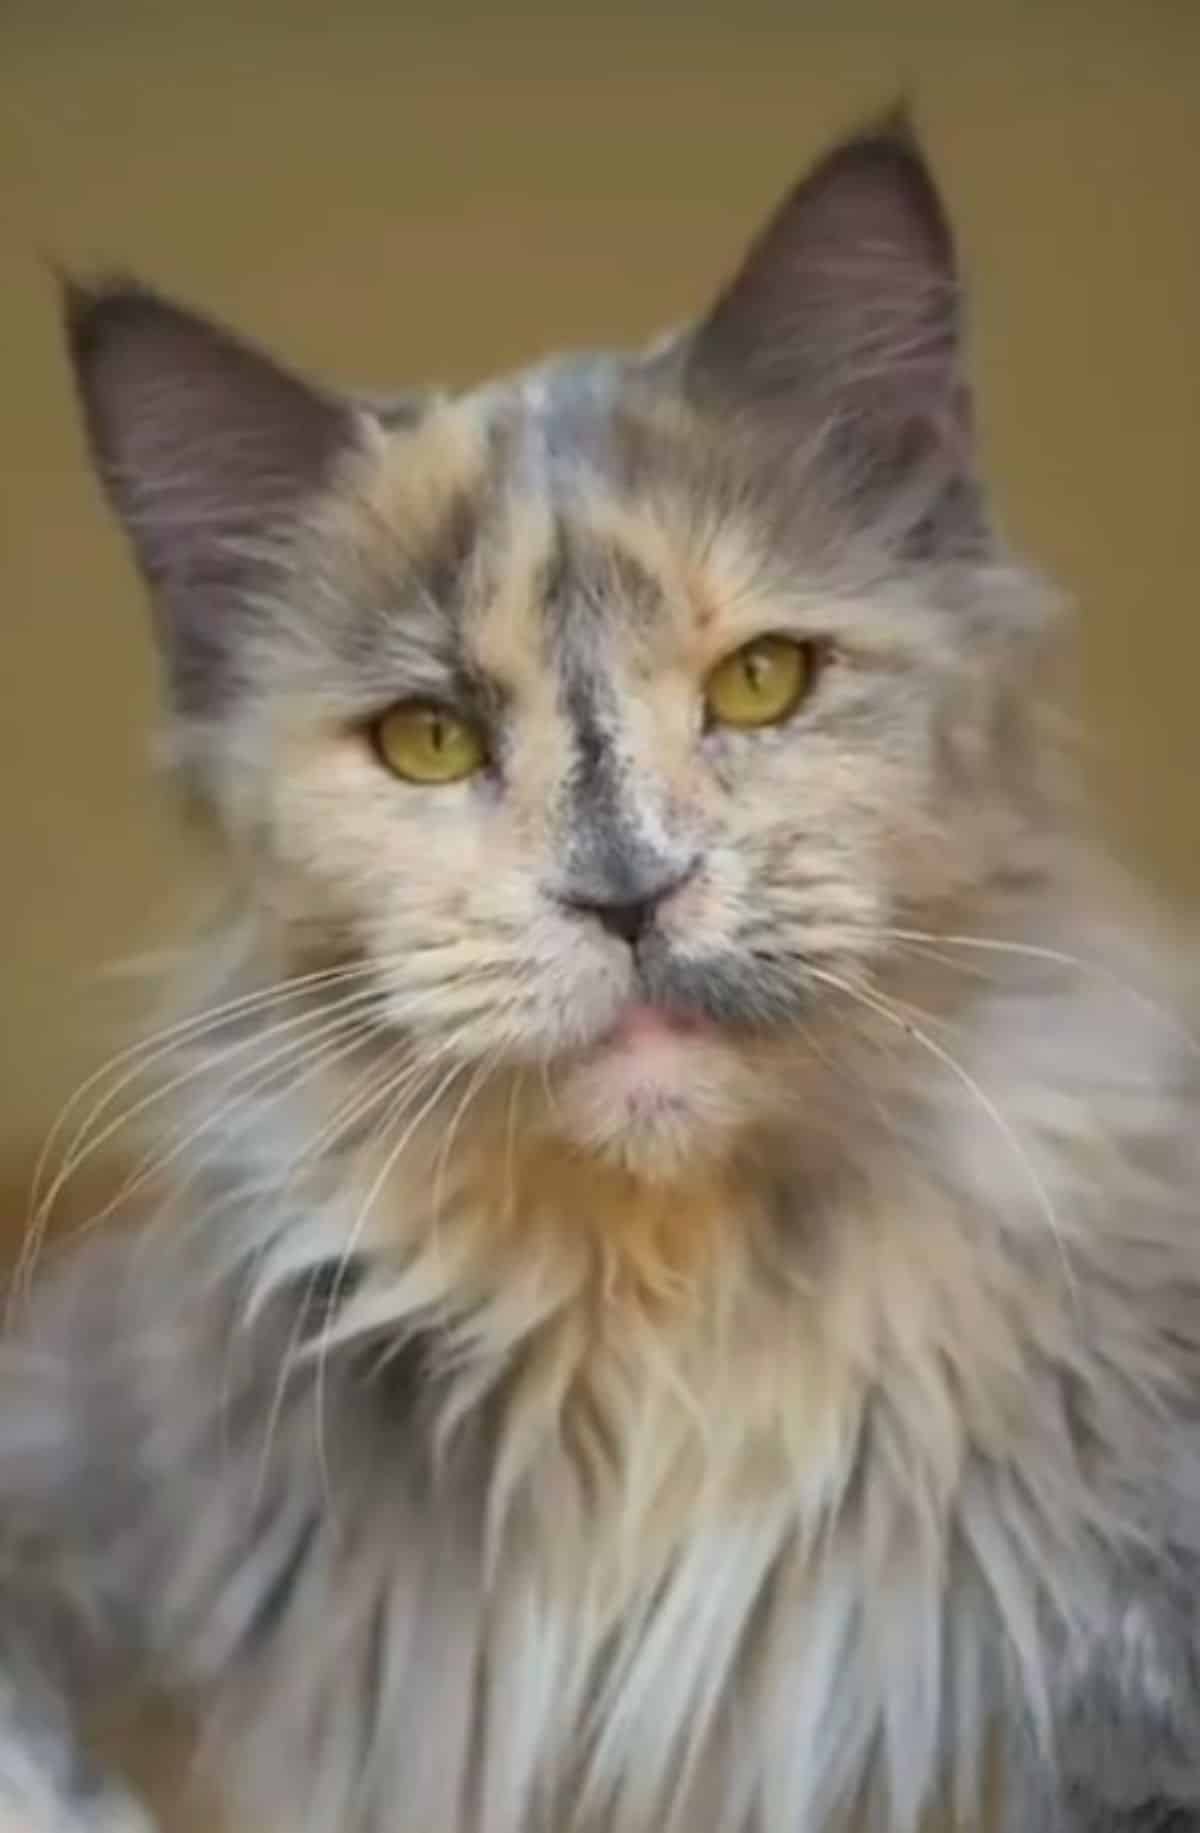 A close-up of a tortoise maine coon face.